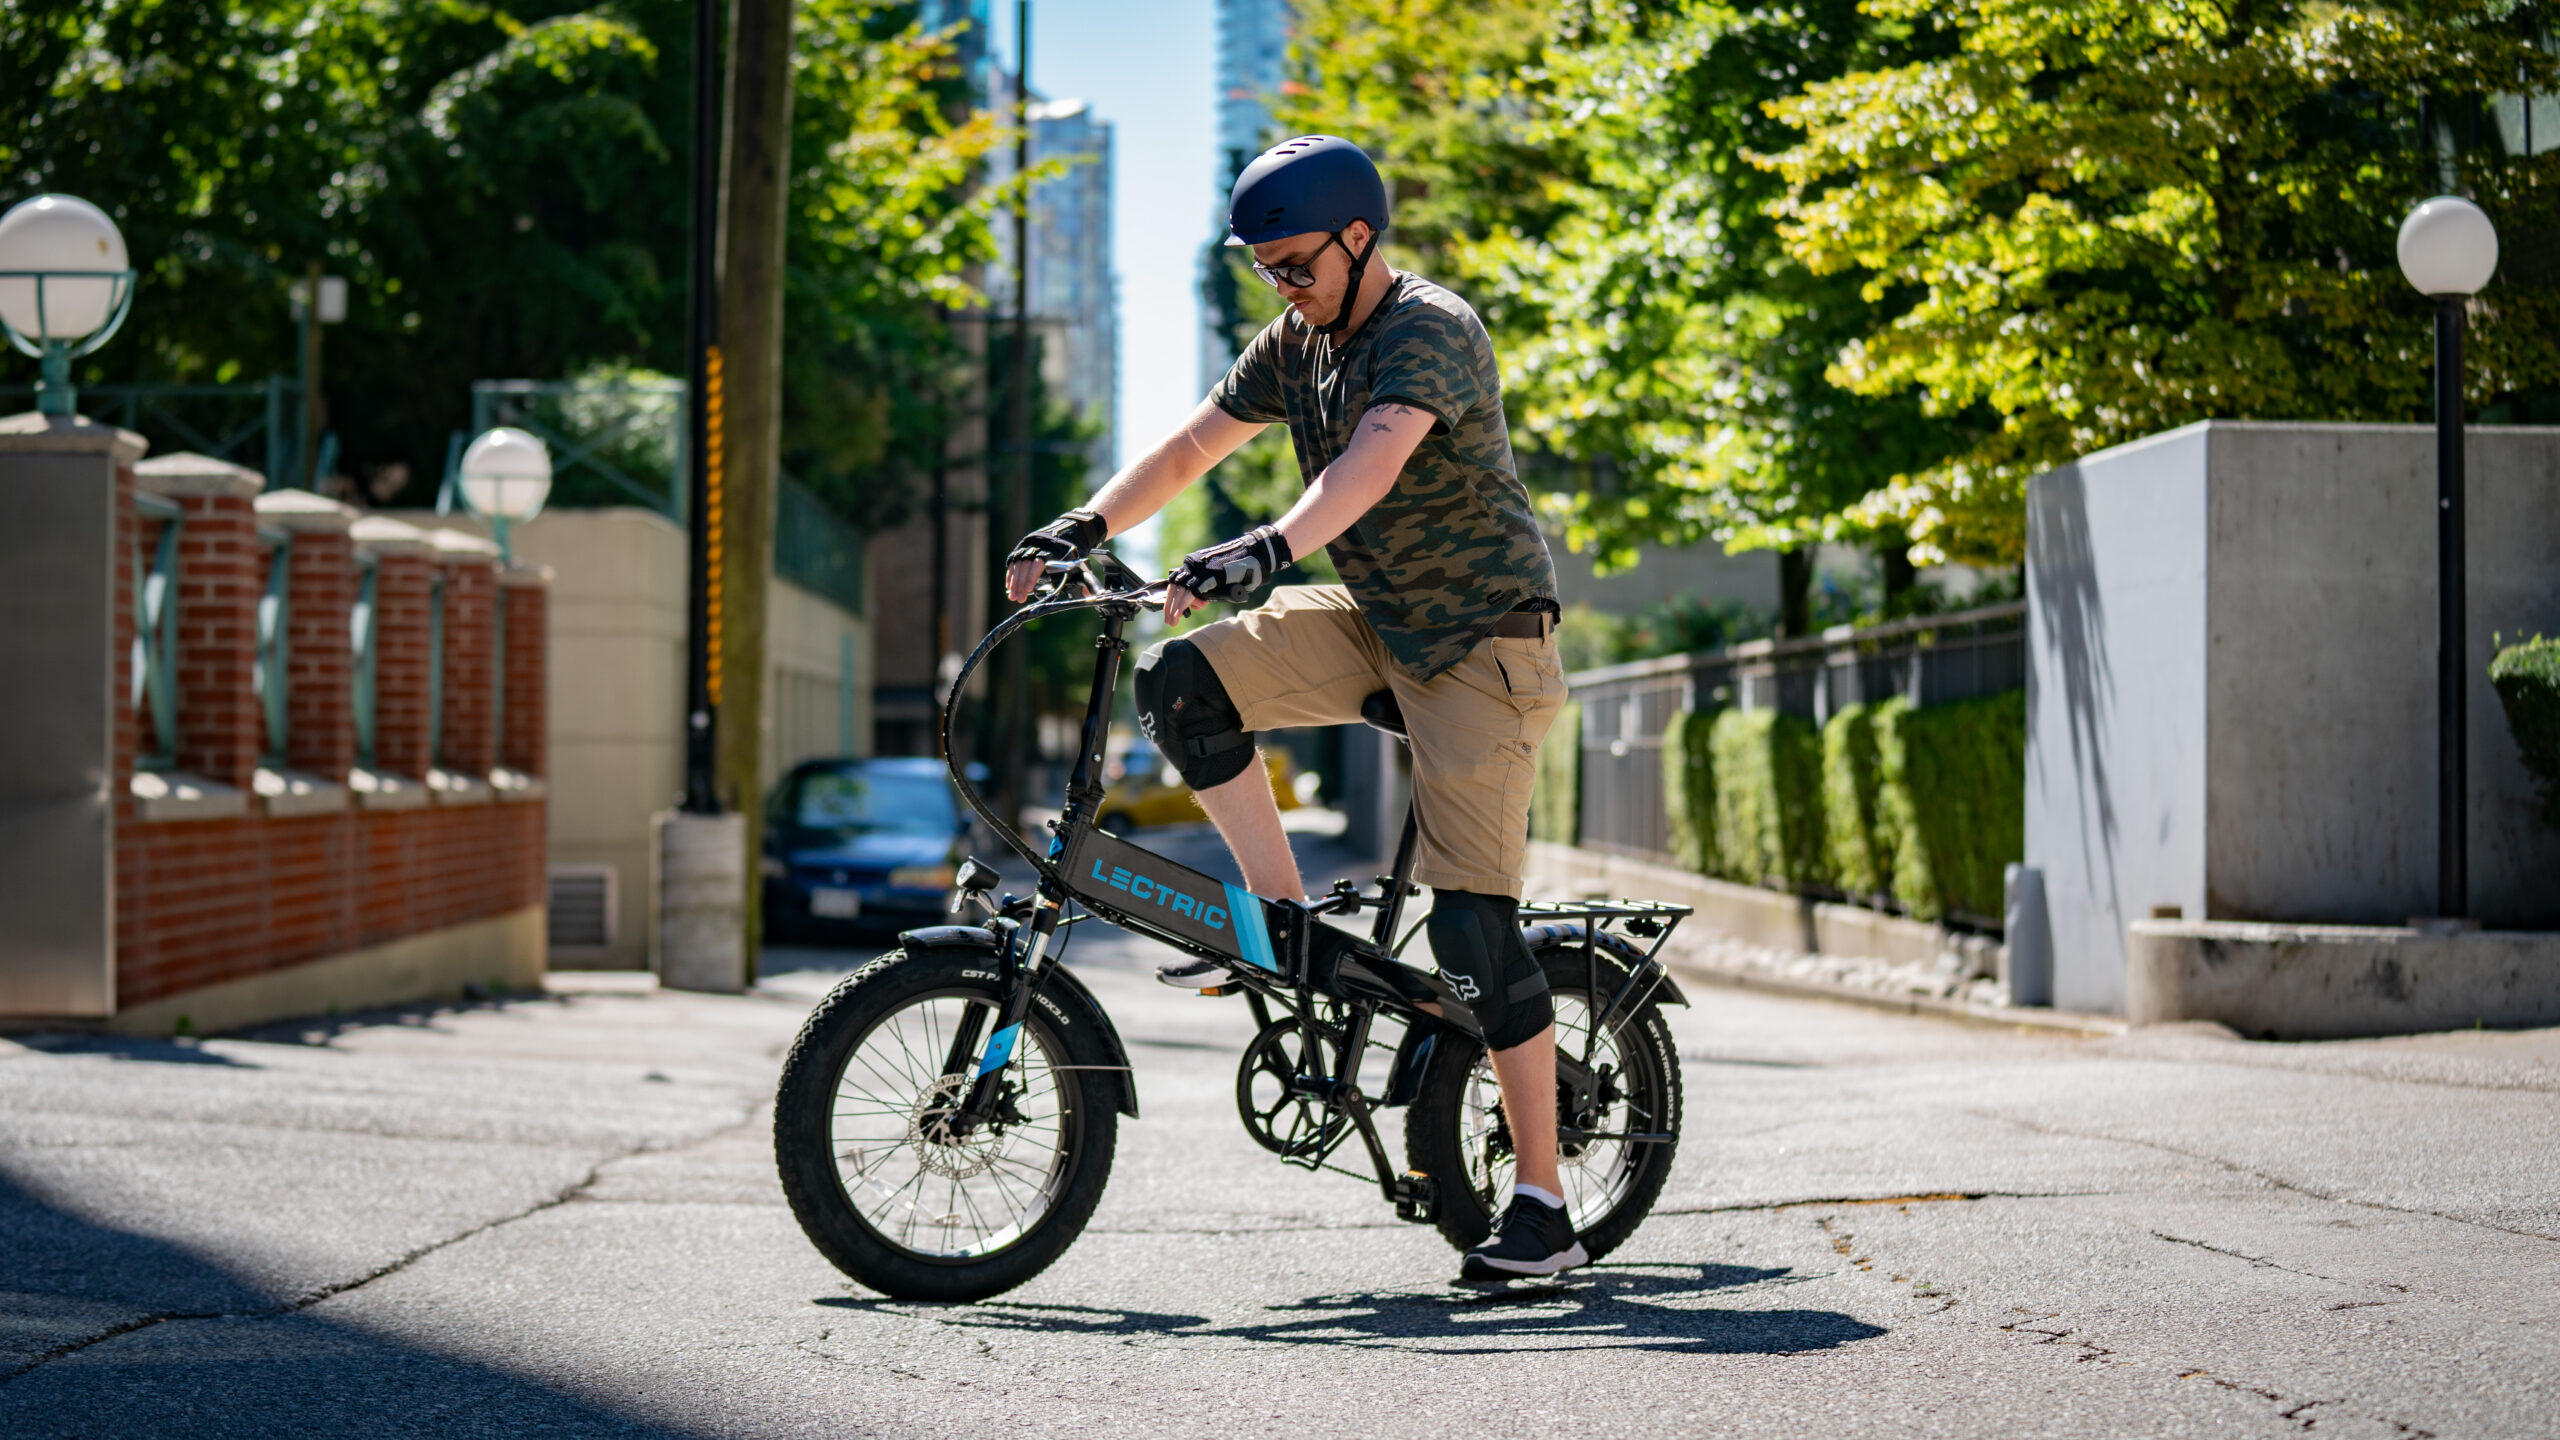 Standing on lectric xp 2.0 e-bike